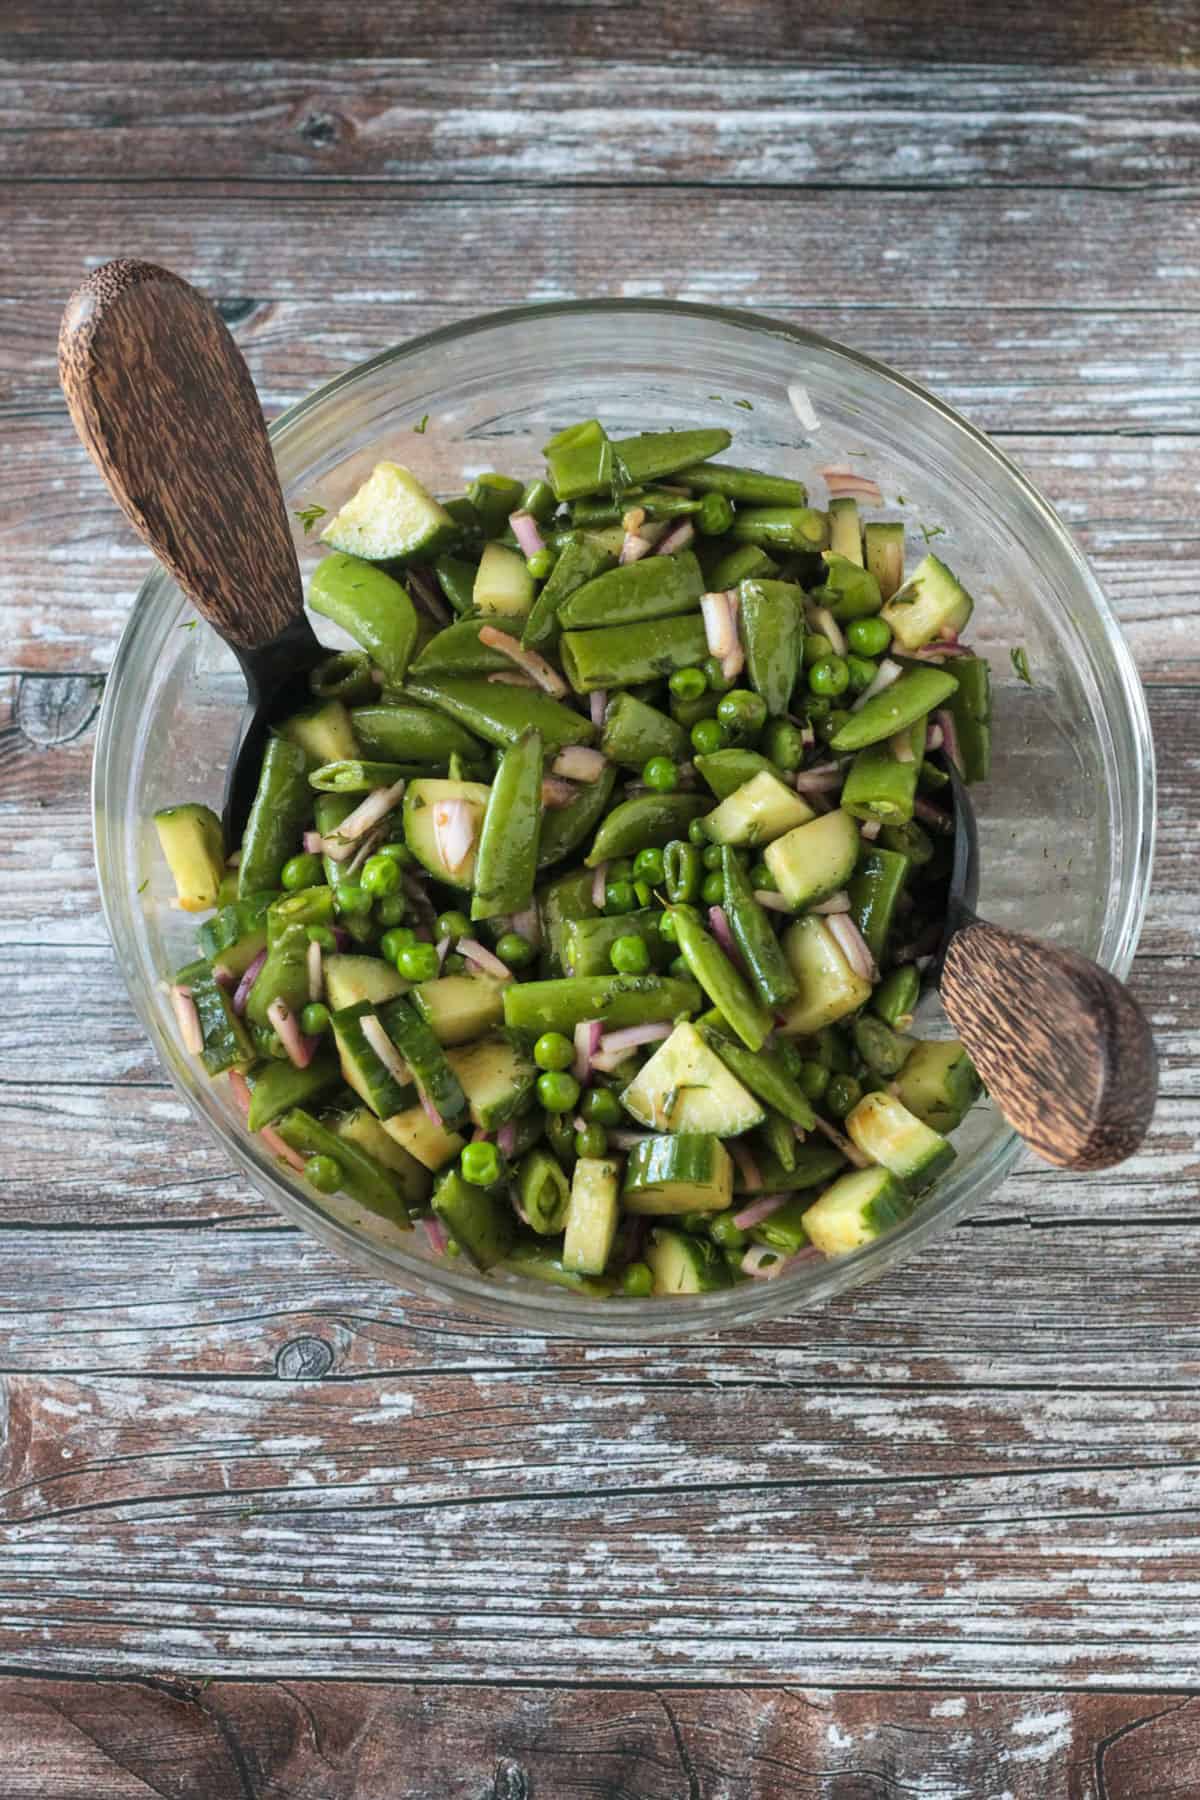 Snap peas, sweet peas, cucumbers, onion, fresh herbs, and dressing mixed in a glass bowl.